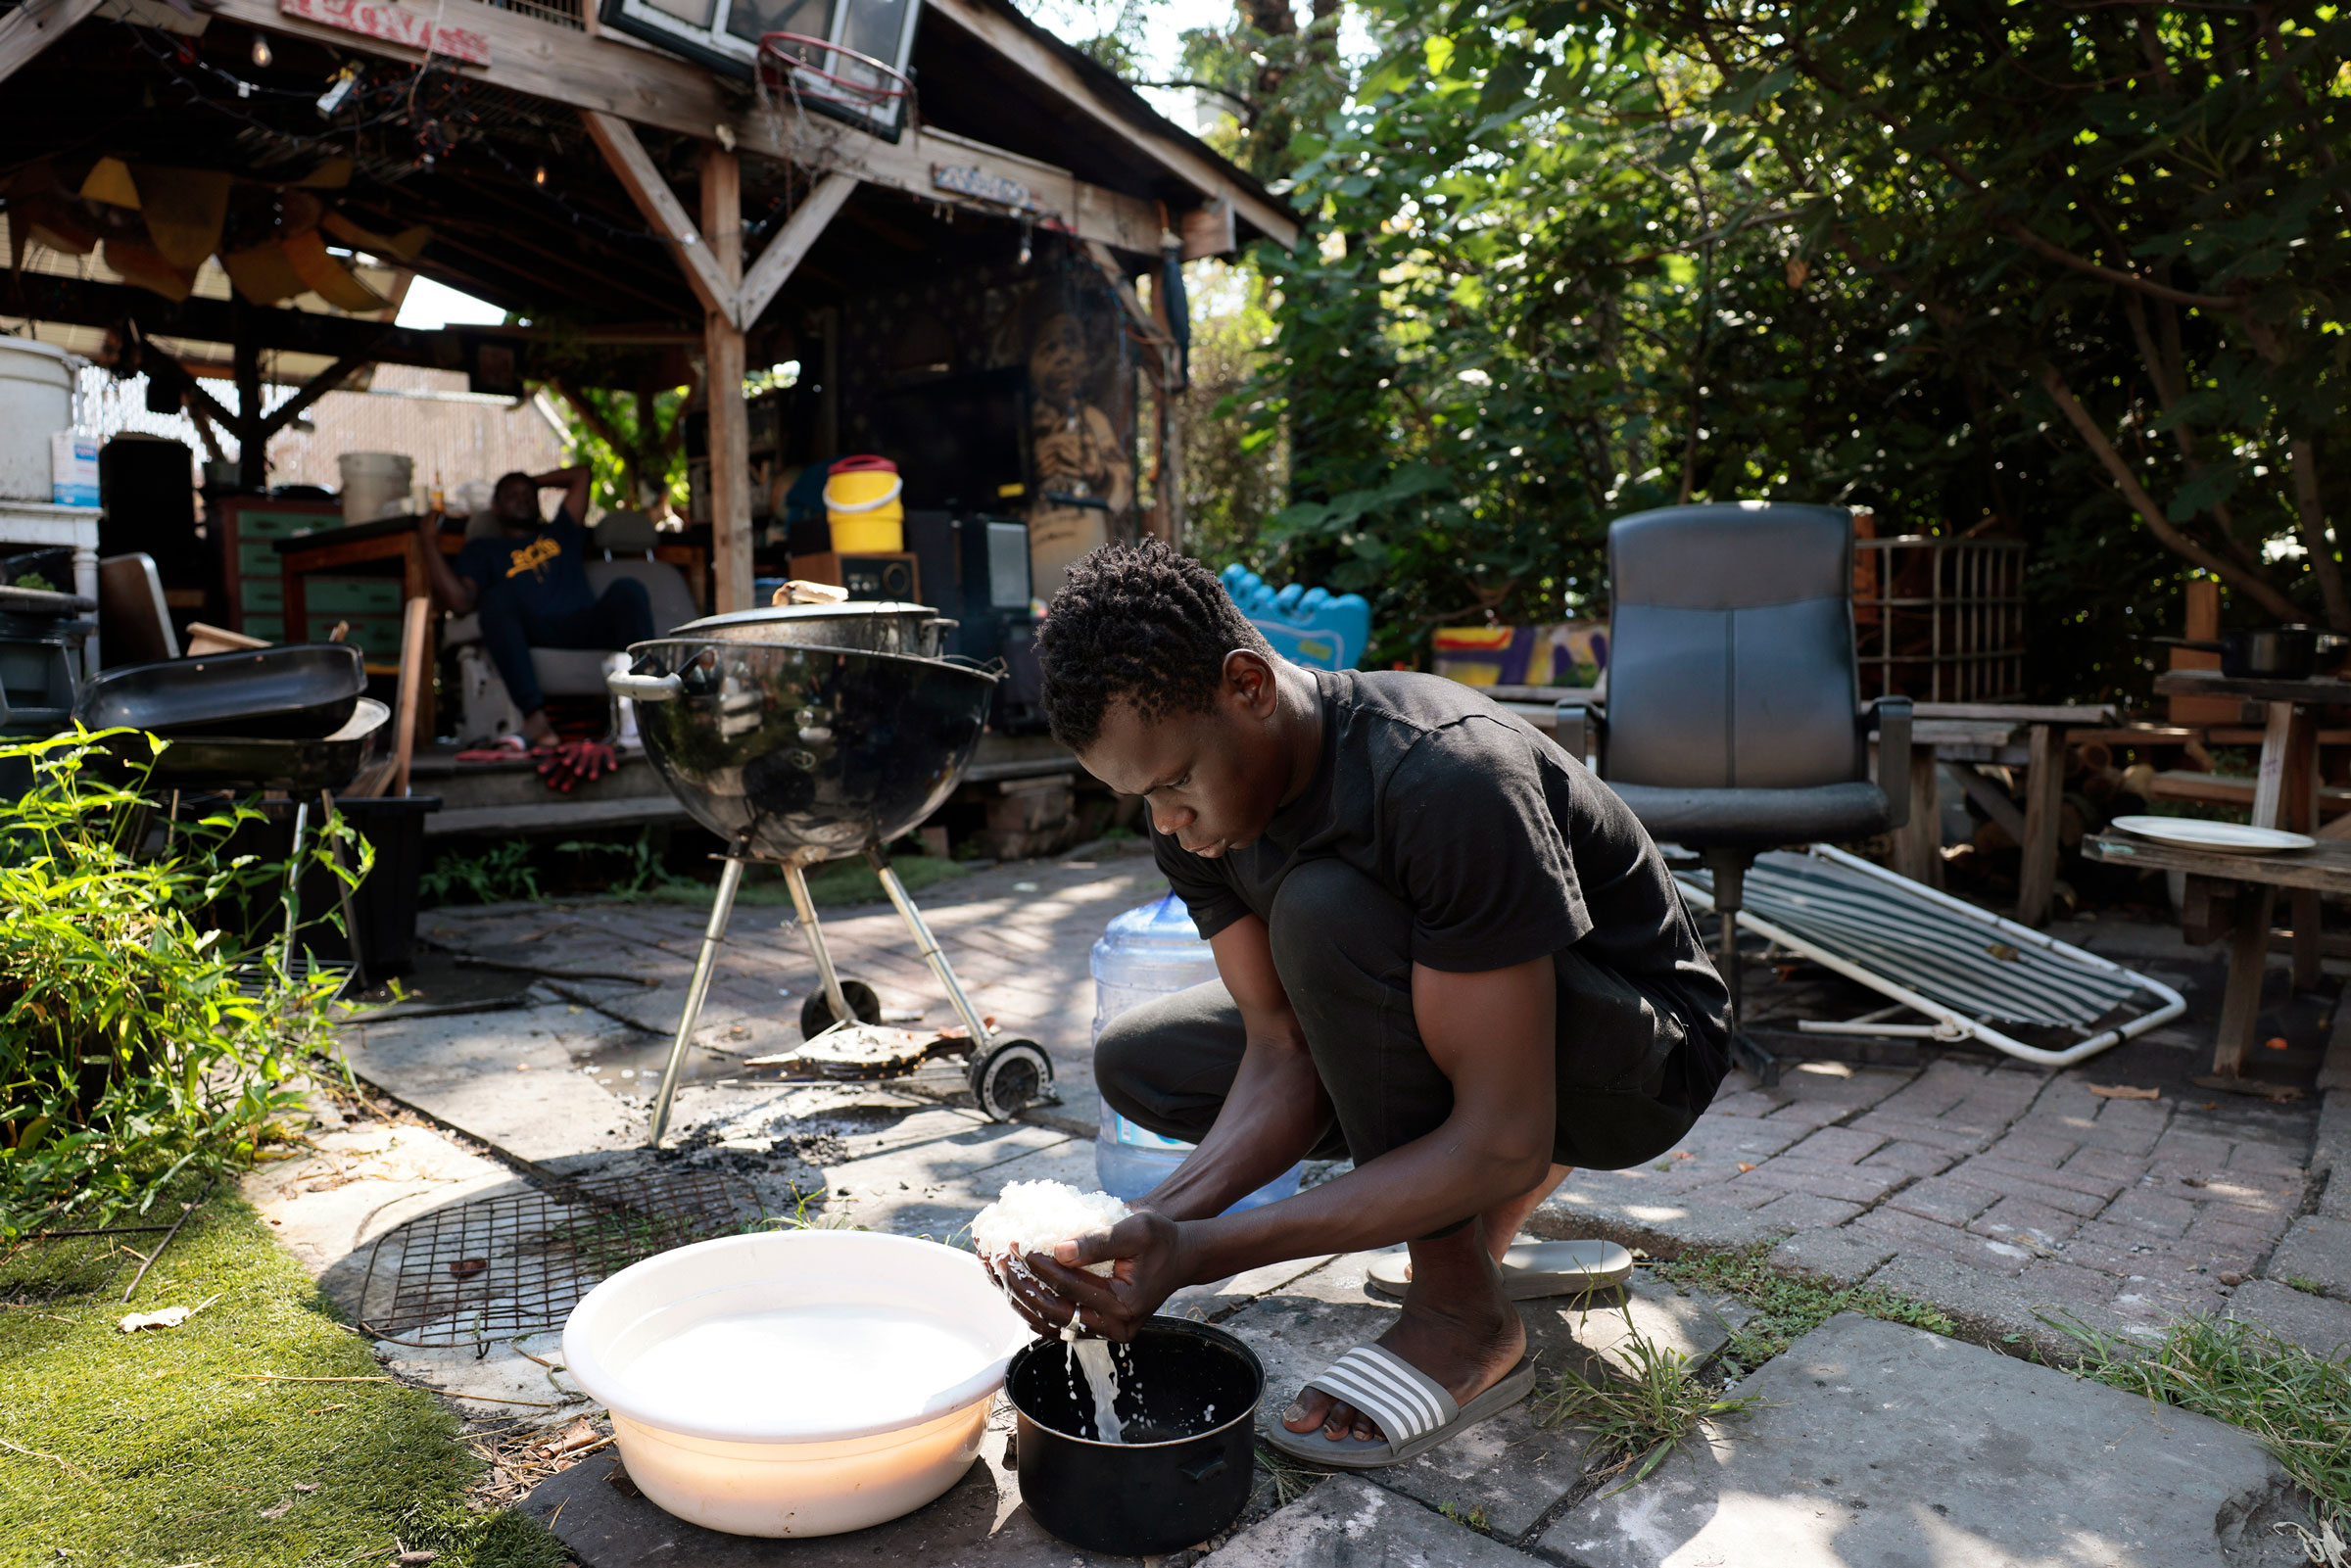 A migrant from Mauritania washes rice at Bushwick City Farm, which had provided migrants who were staying in a shelter across the street with fresh produce and invited them to use their space for cooking, on Aug. 16, 2023. (Jessica Rinaldi—The Boston Globe/Getty Images)